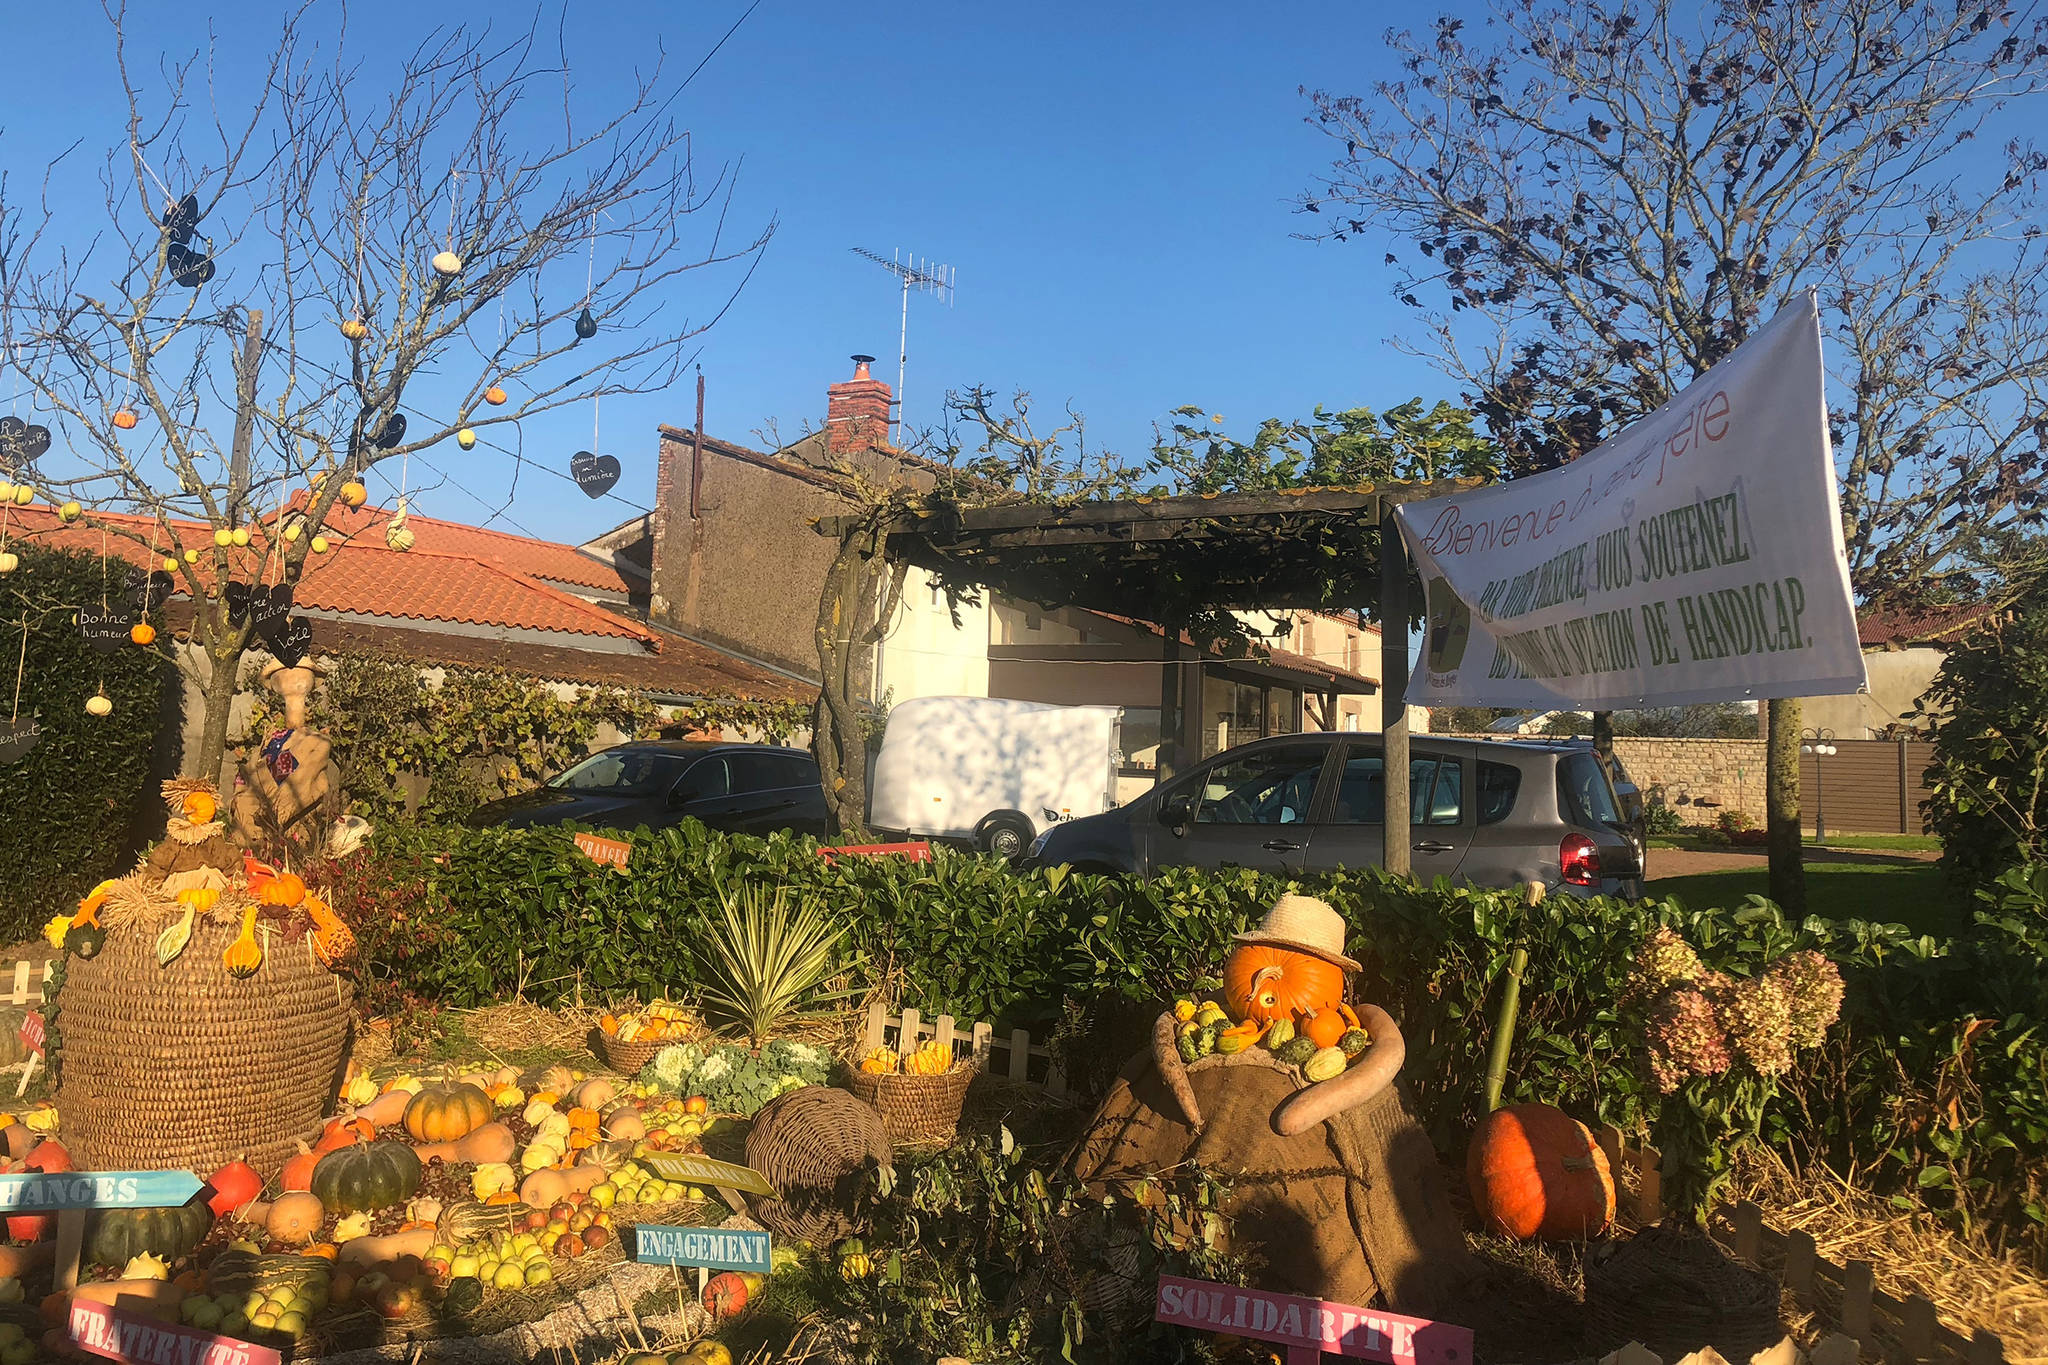 The entrance to the festival decorated with colorful gourds, one wearing a hat on Oct. 21, 2018. (Bridget McTague | For the Juneau Empire)